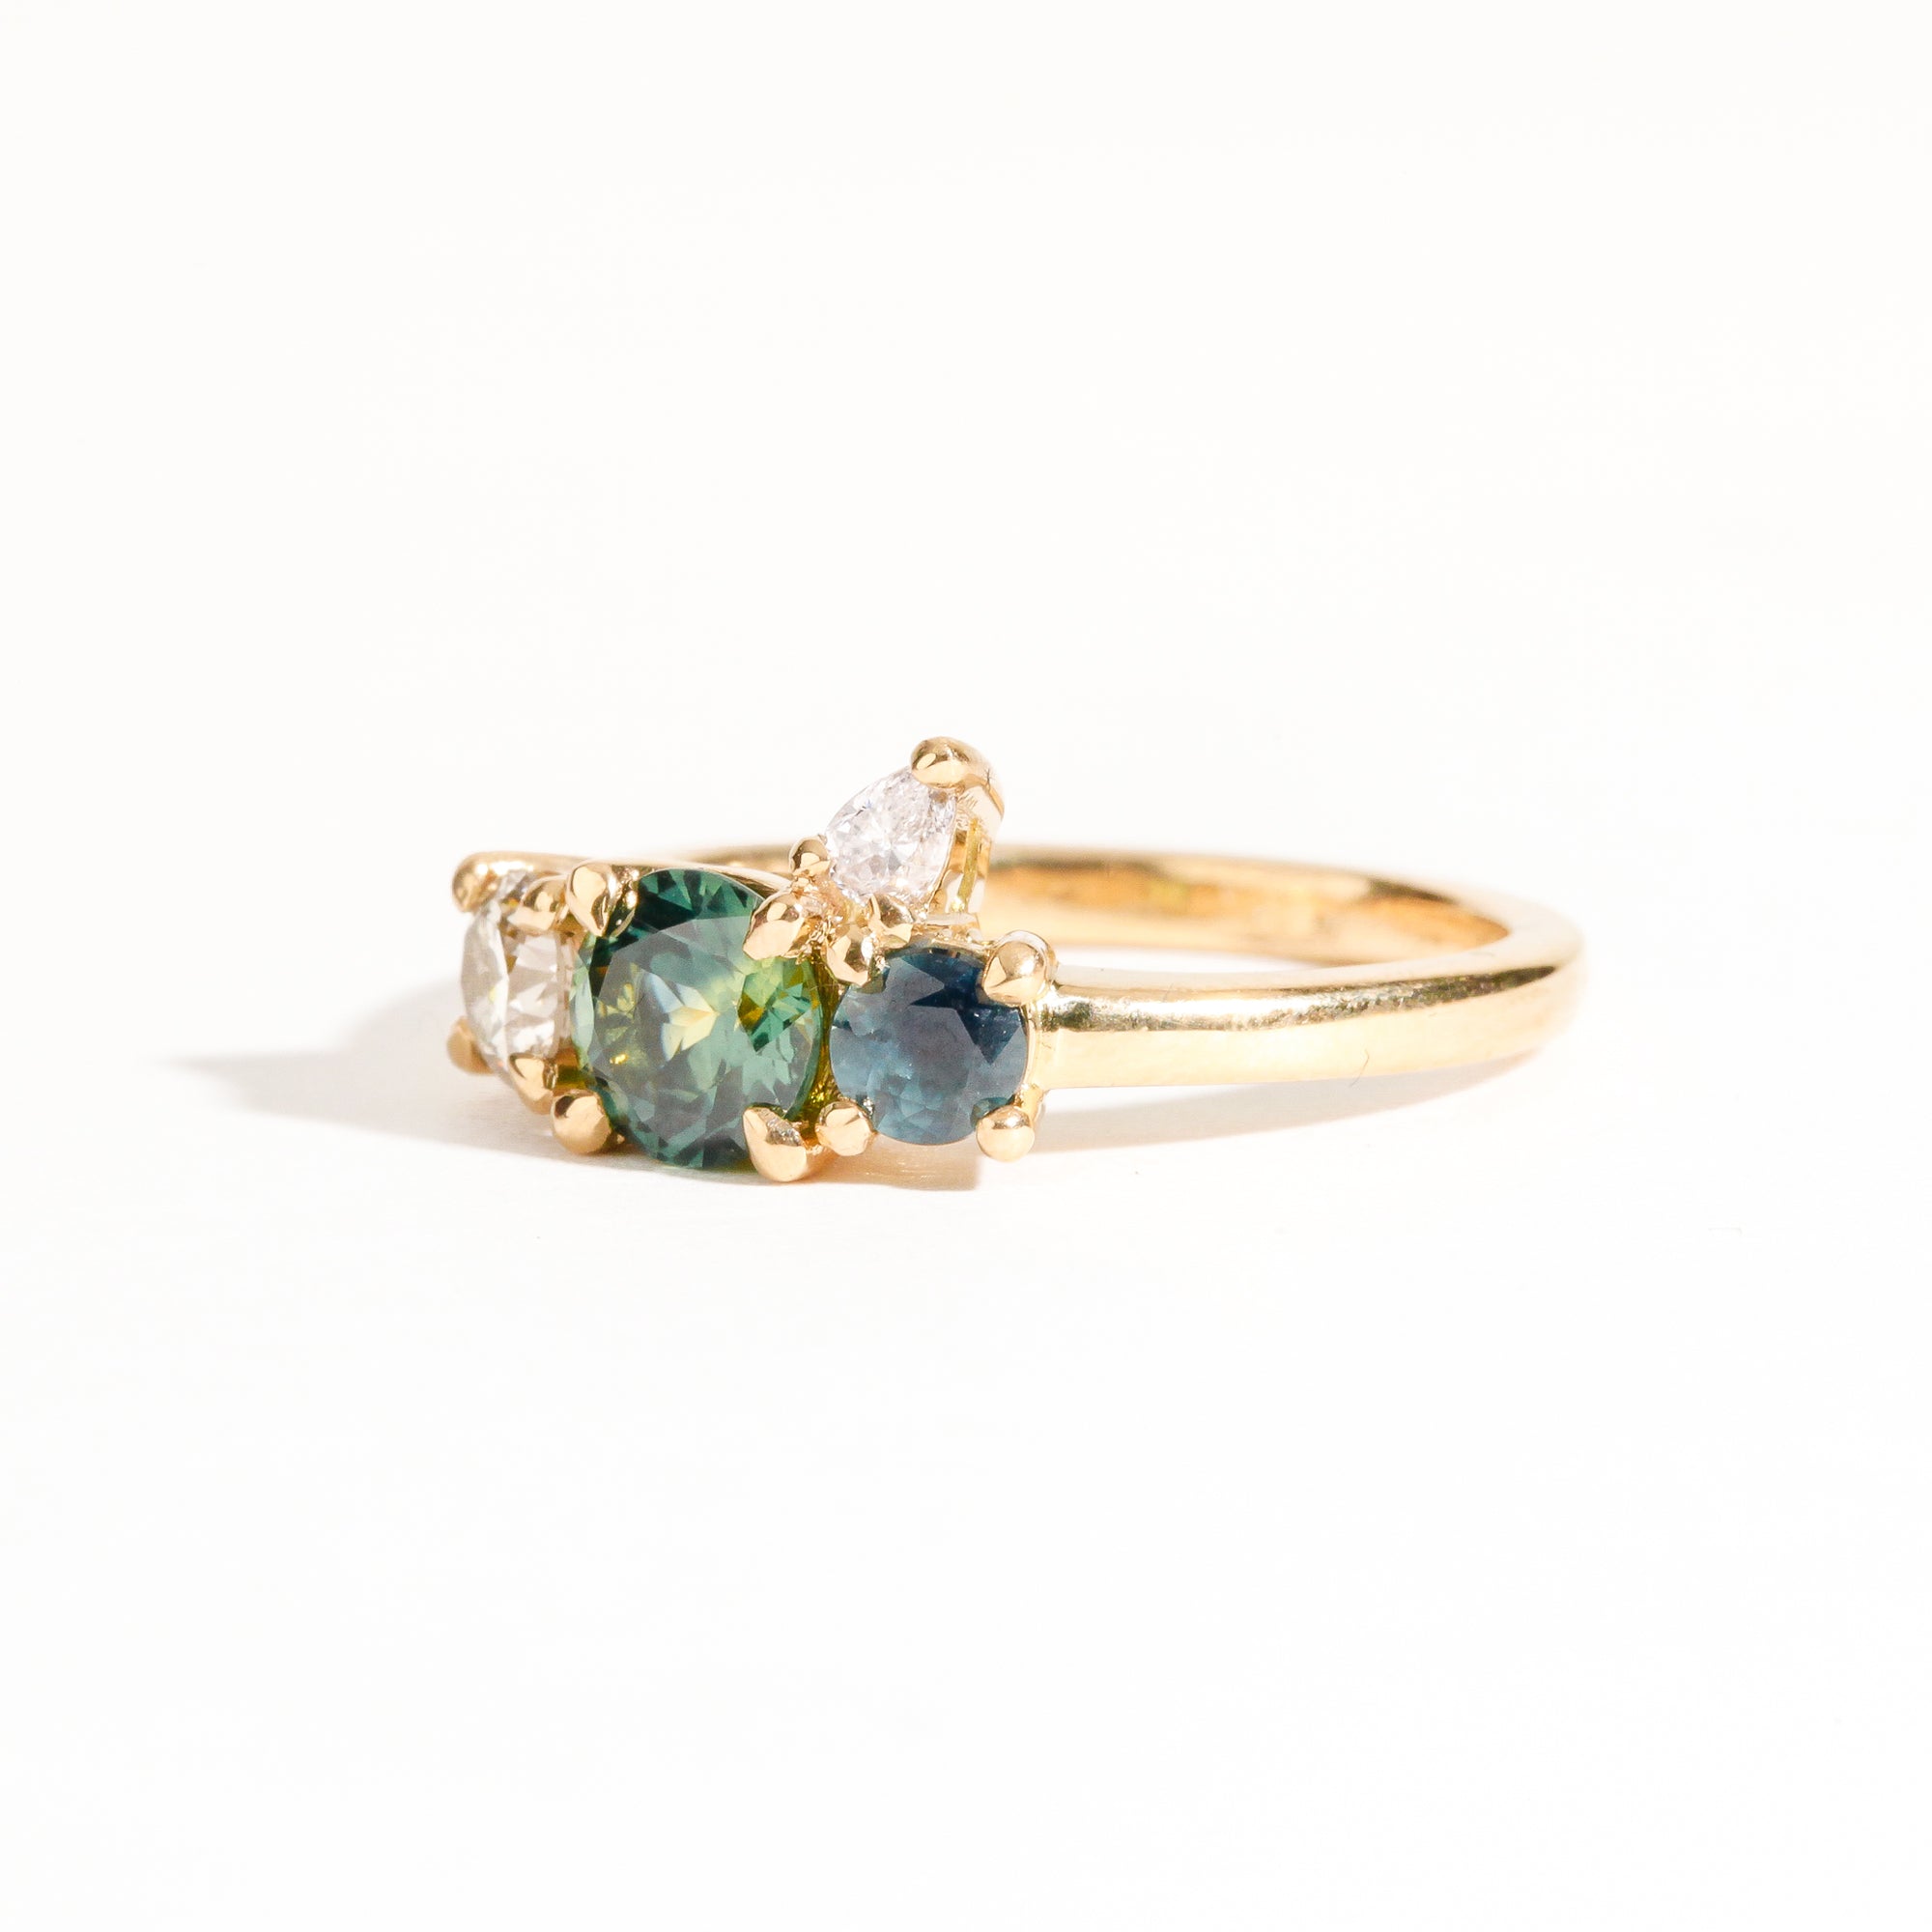 Handmade Sapphire and Diamond Cluster Ring in 18ct Yellow Gold, Custom, Bespoke rings made in Melbourne.